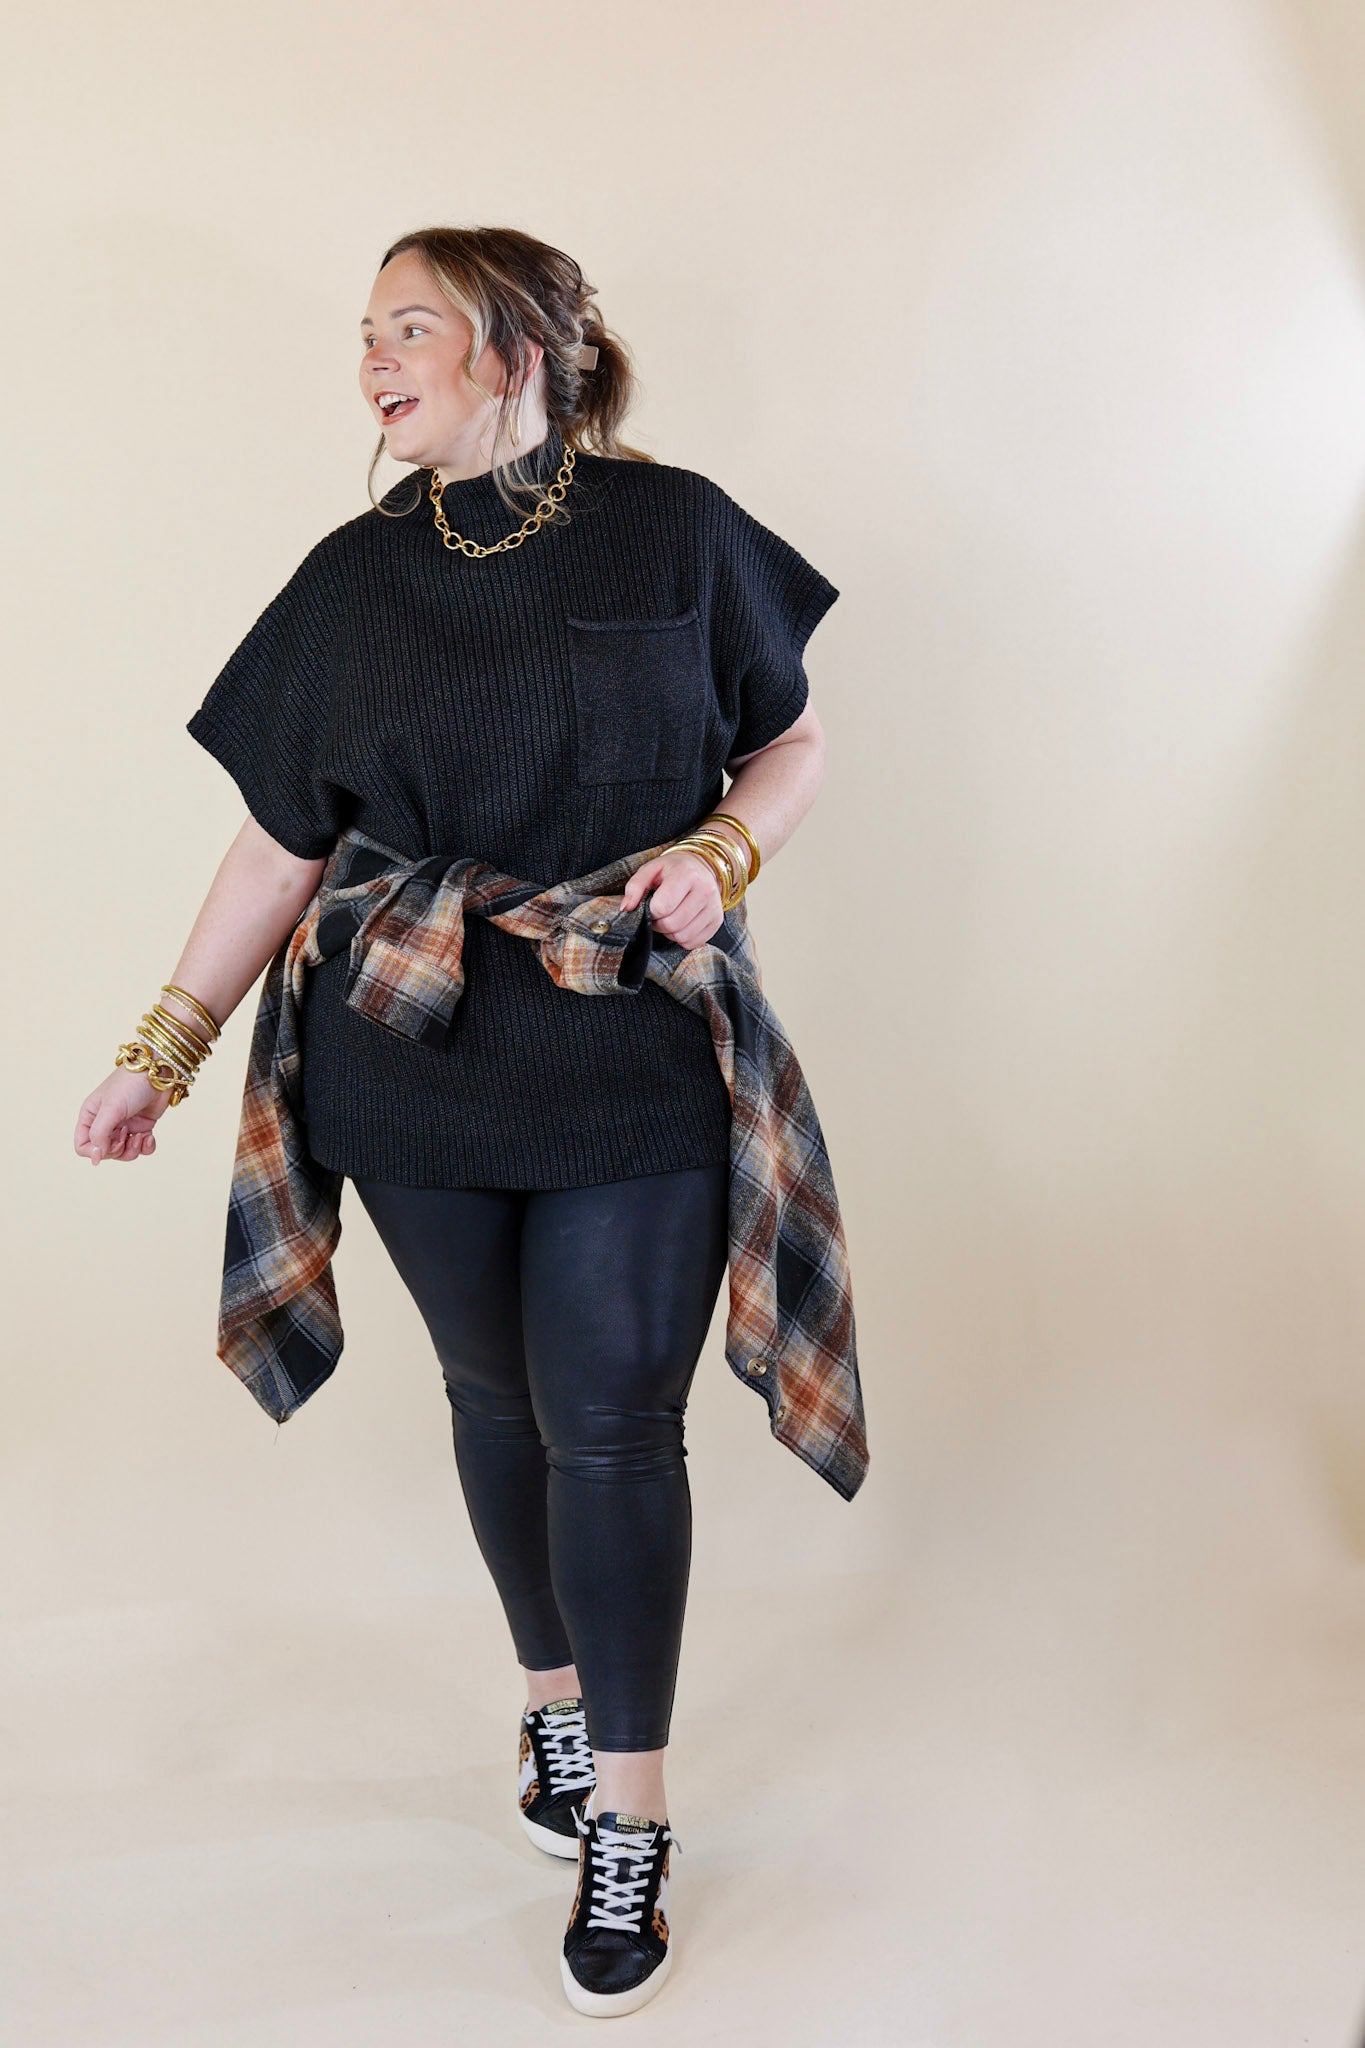 City Sights Cap Sleeve Sweater Top in Black - Giddy Up Glamour Boutique